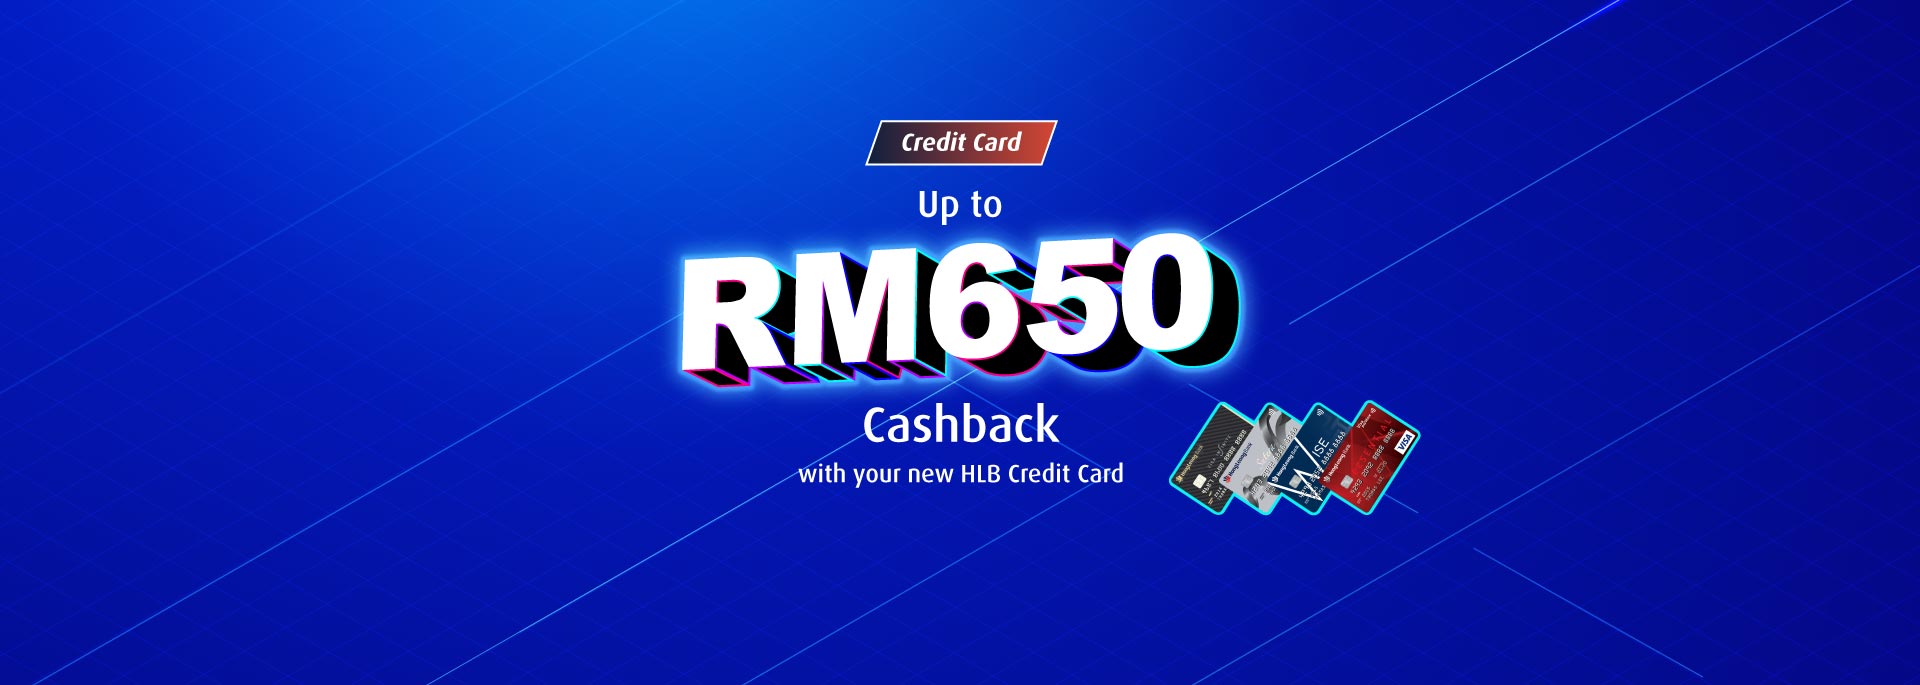 cc acqui connect day rm650 cashback 2023 banner